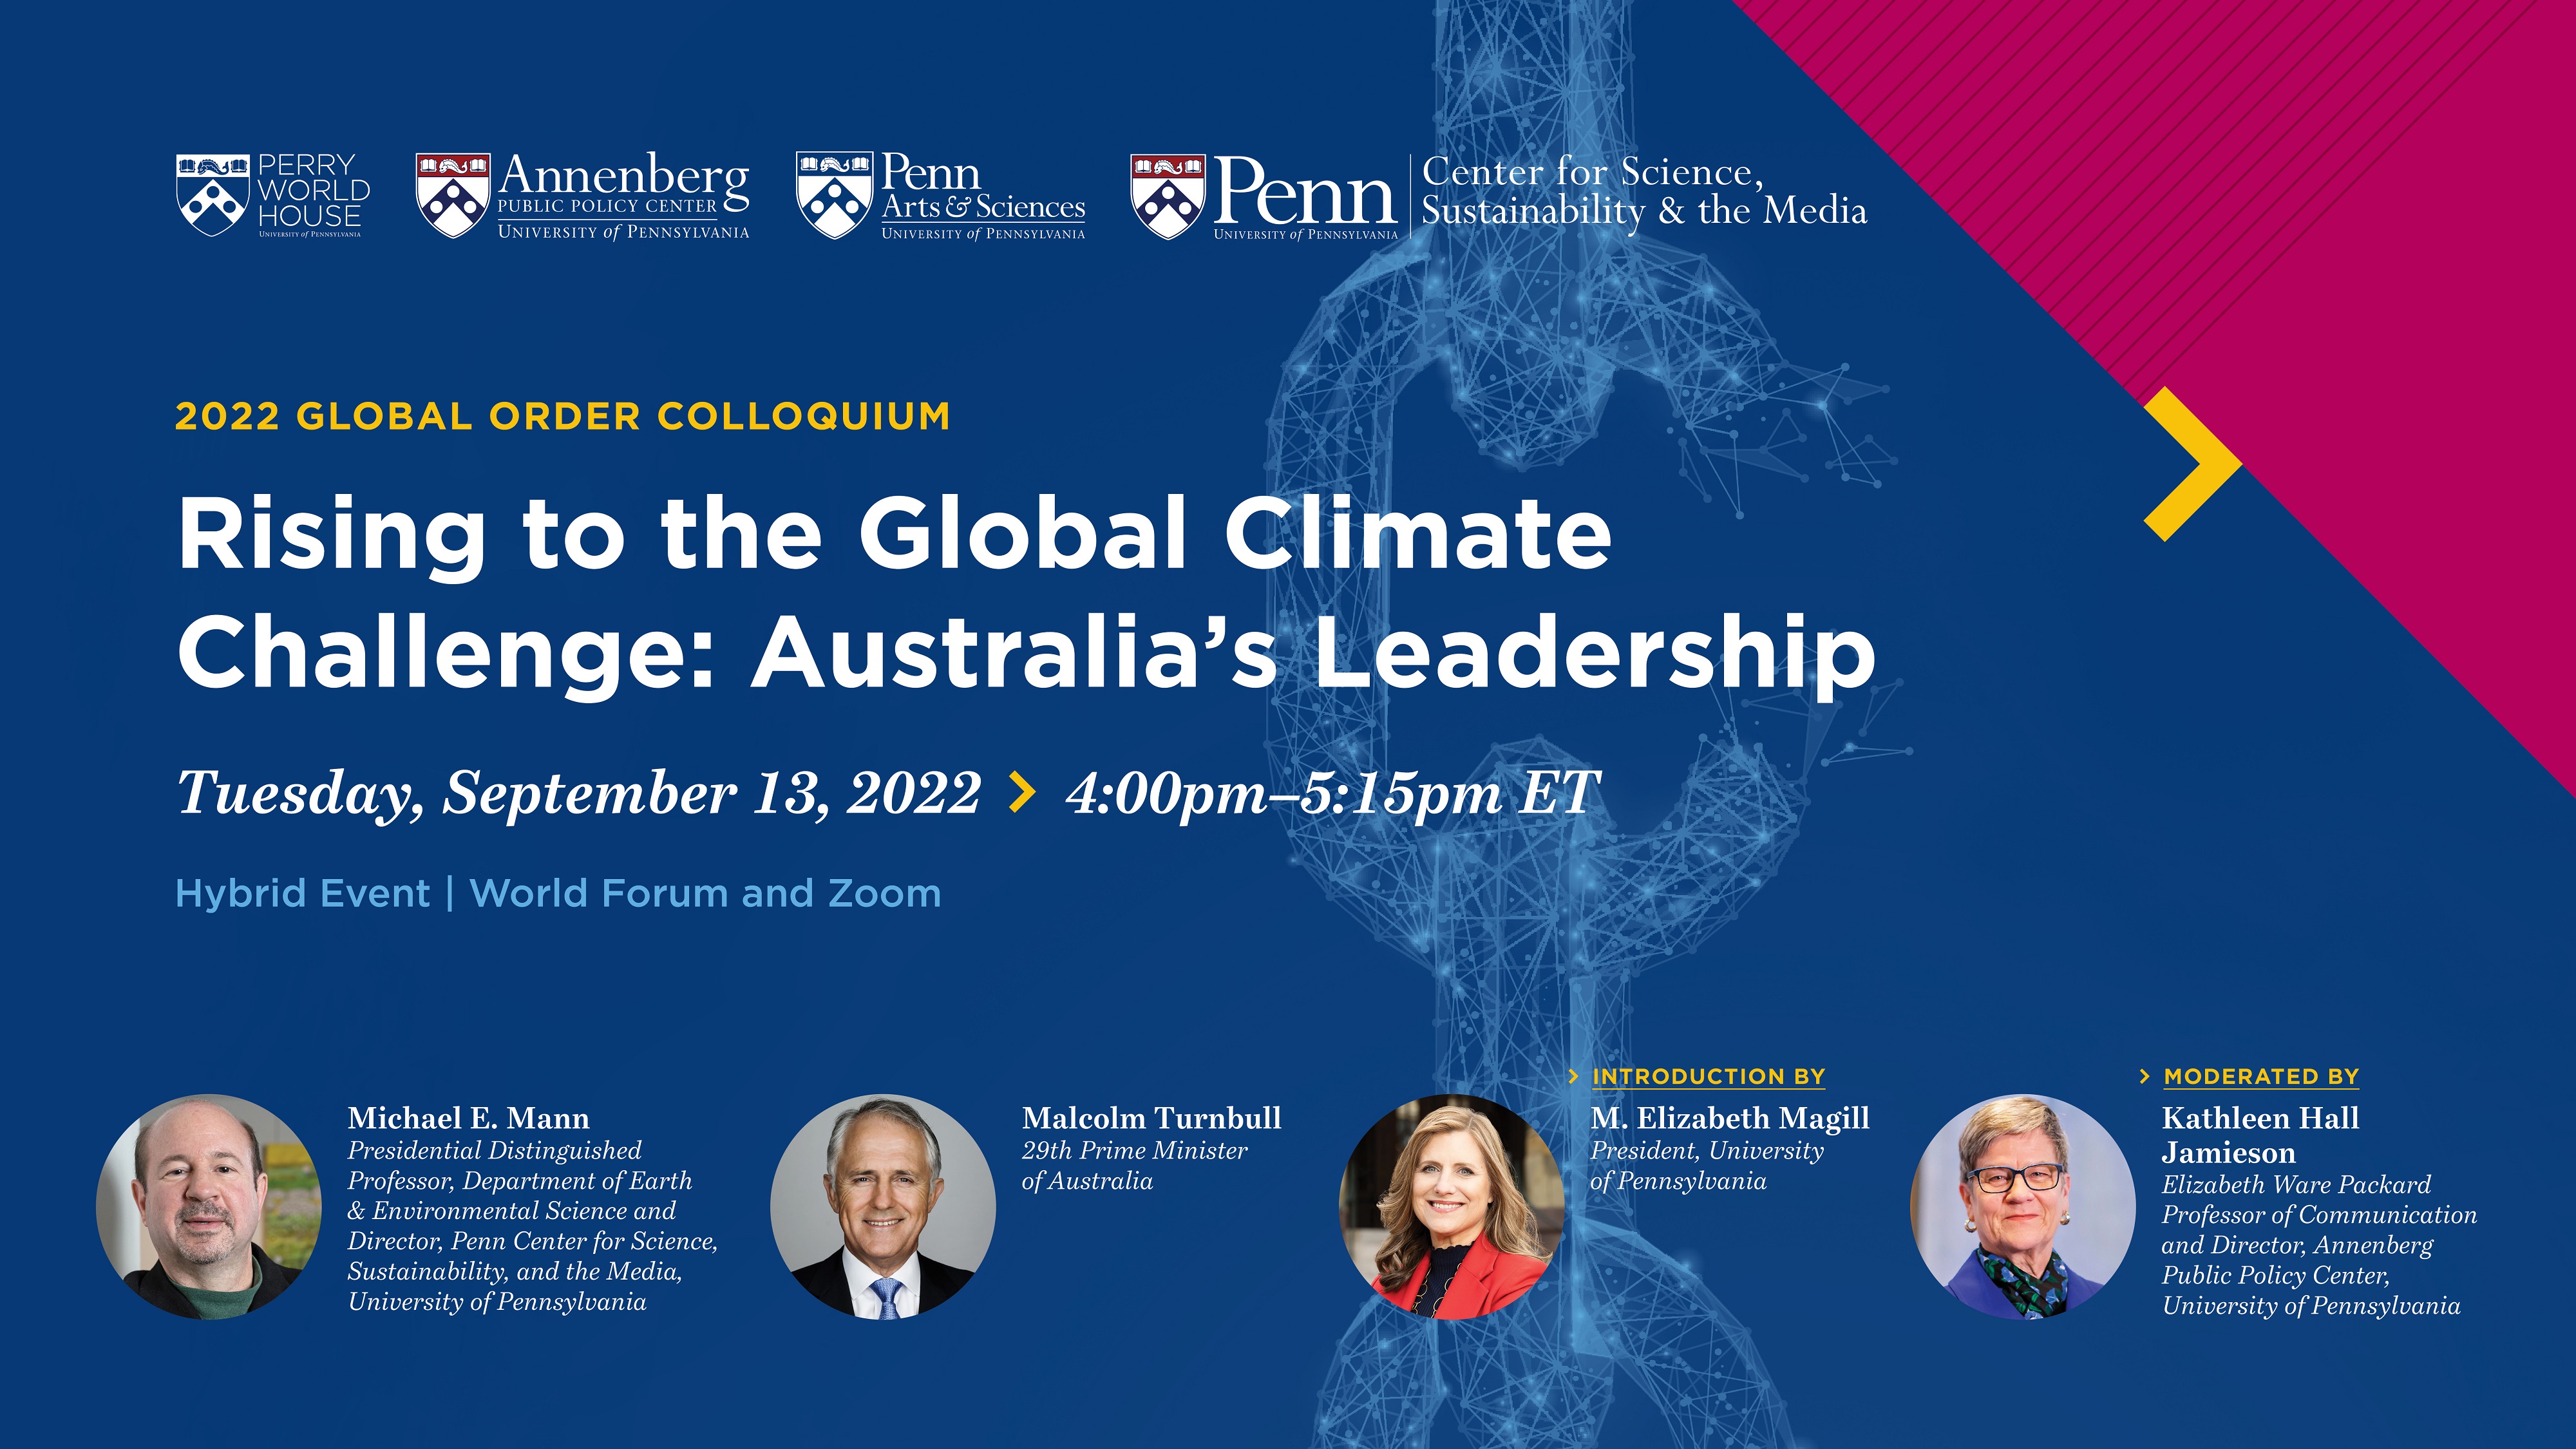 Rising to the Global Climate Challenge: Australia's Leadership with Michael E. Mann, Malcolm Turnbull, and Kathleen Hall Jamieson